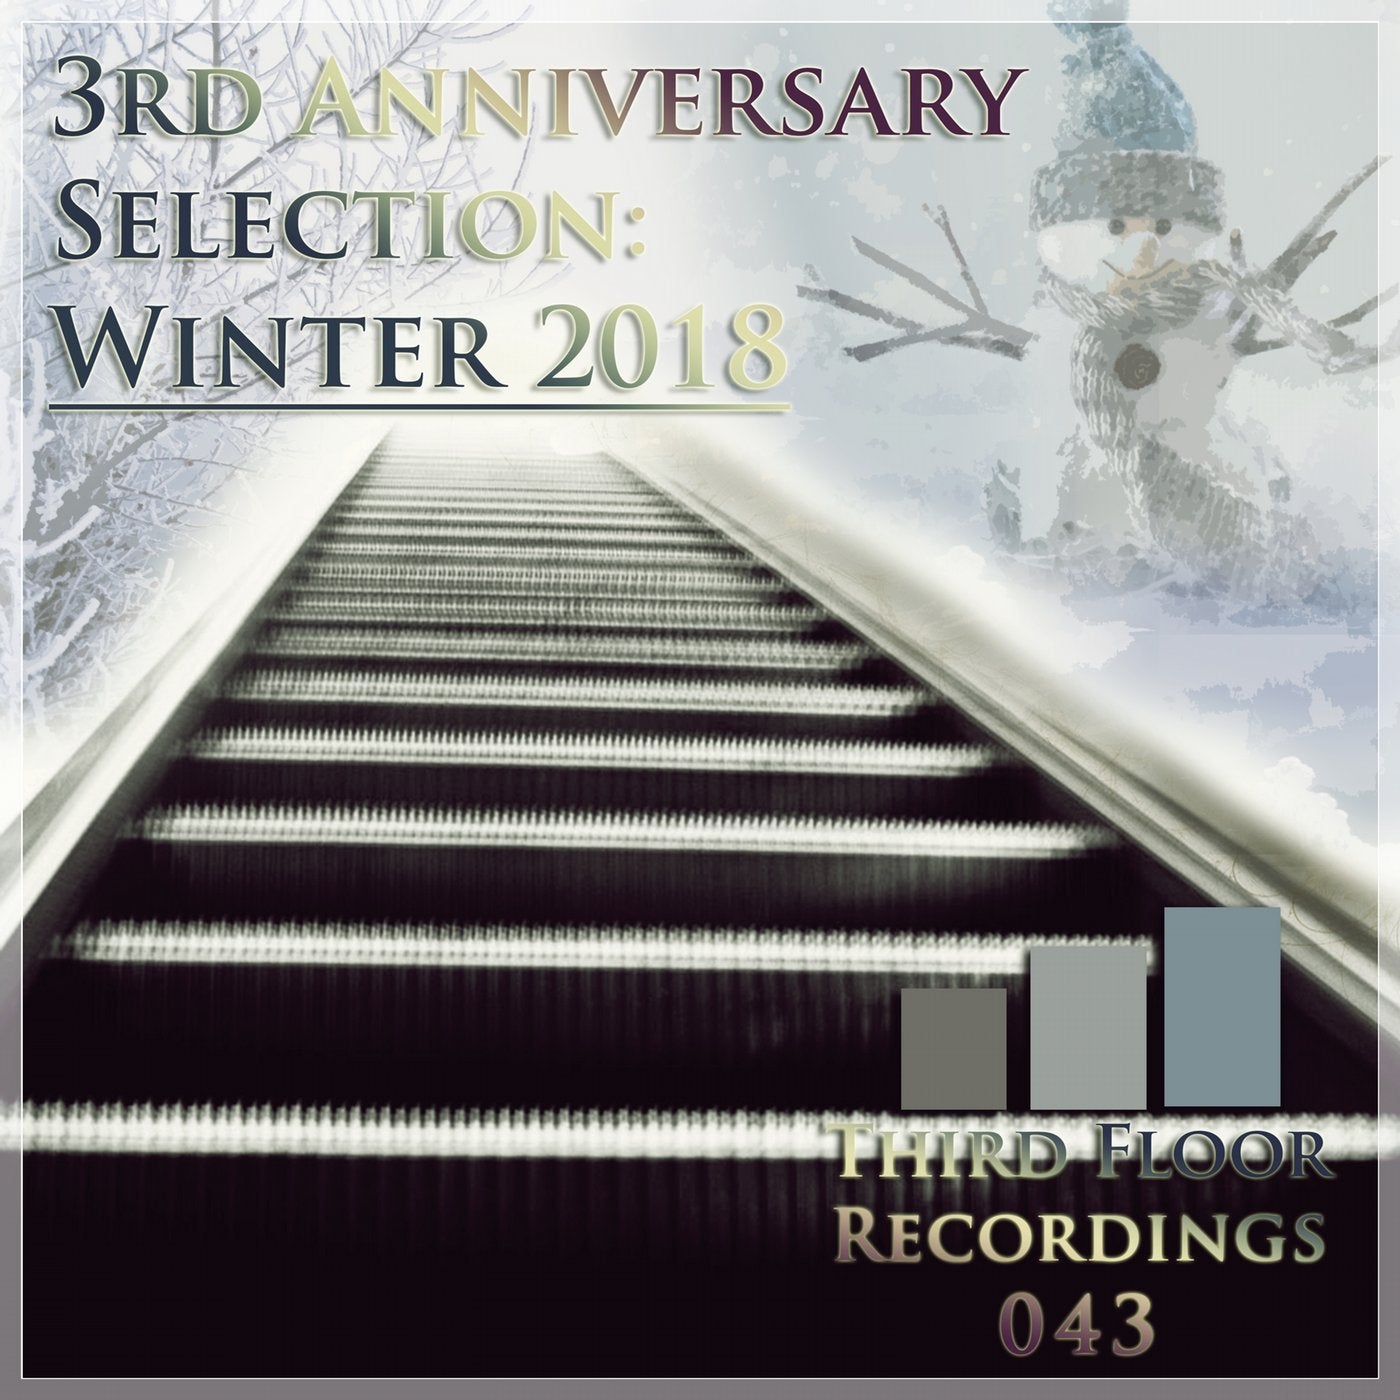 3rd Anniversary Selection: Winter 2018